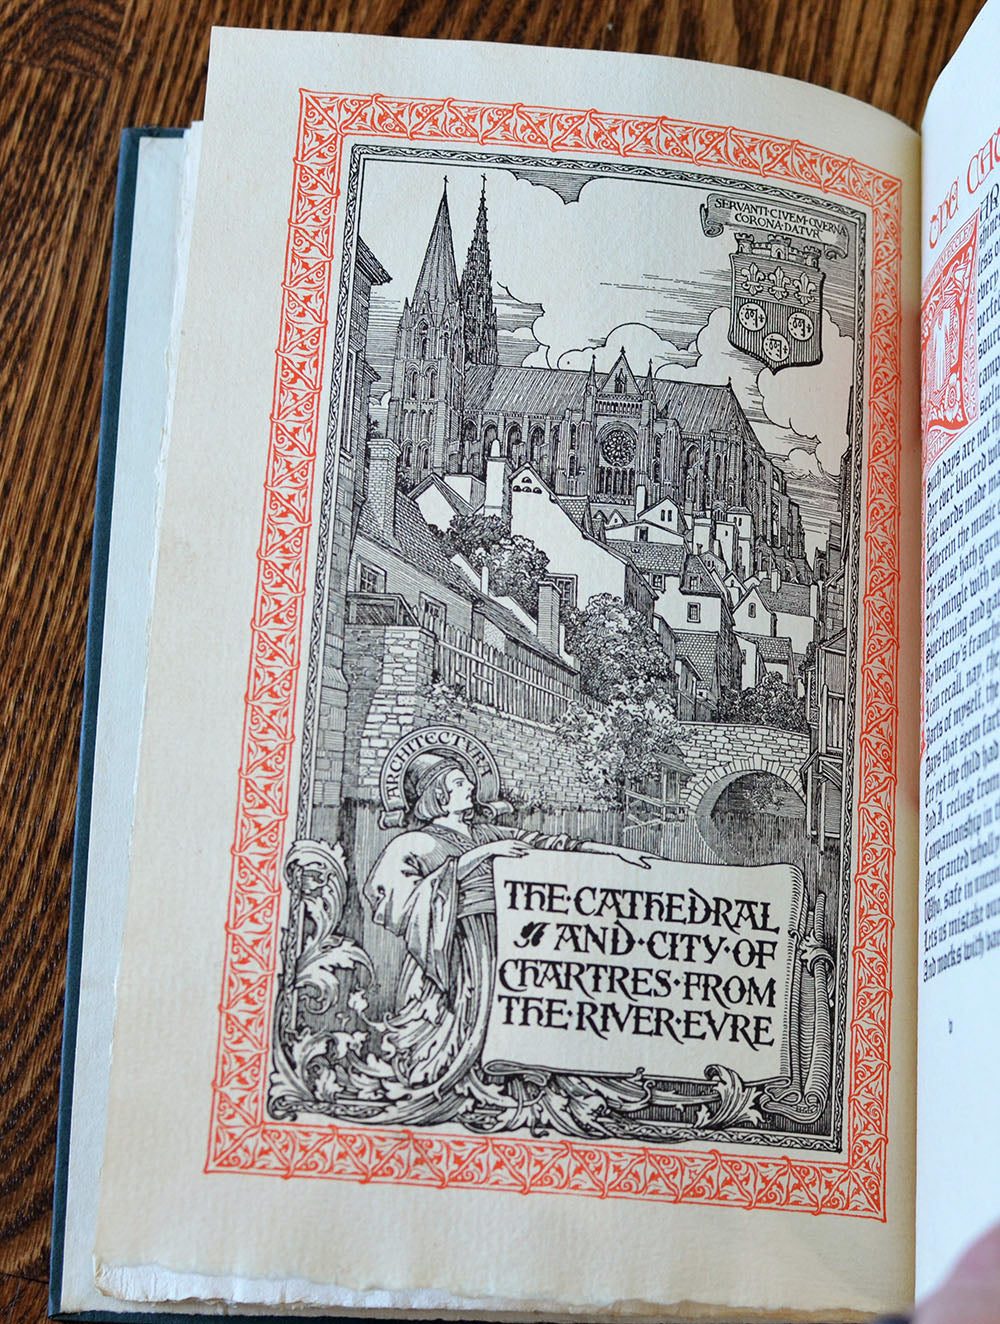 [Bertram Grosvenor Goodhue | Limited to 60 Copies | Presentation Copy to T.M. Cleland] The Cathedral